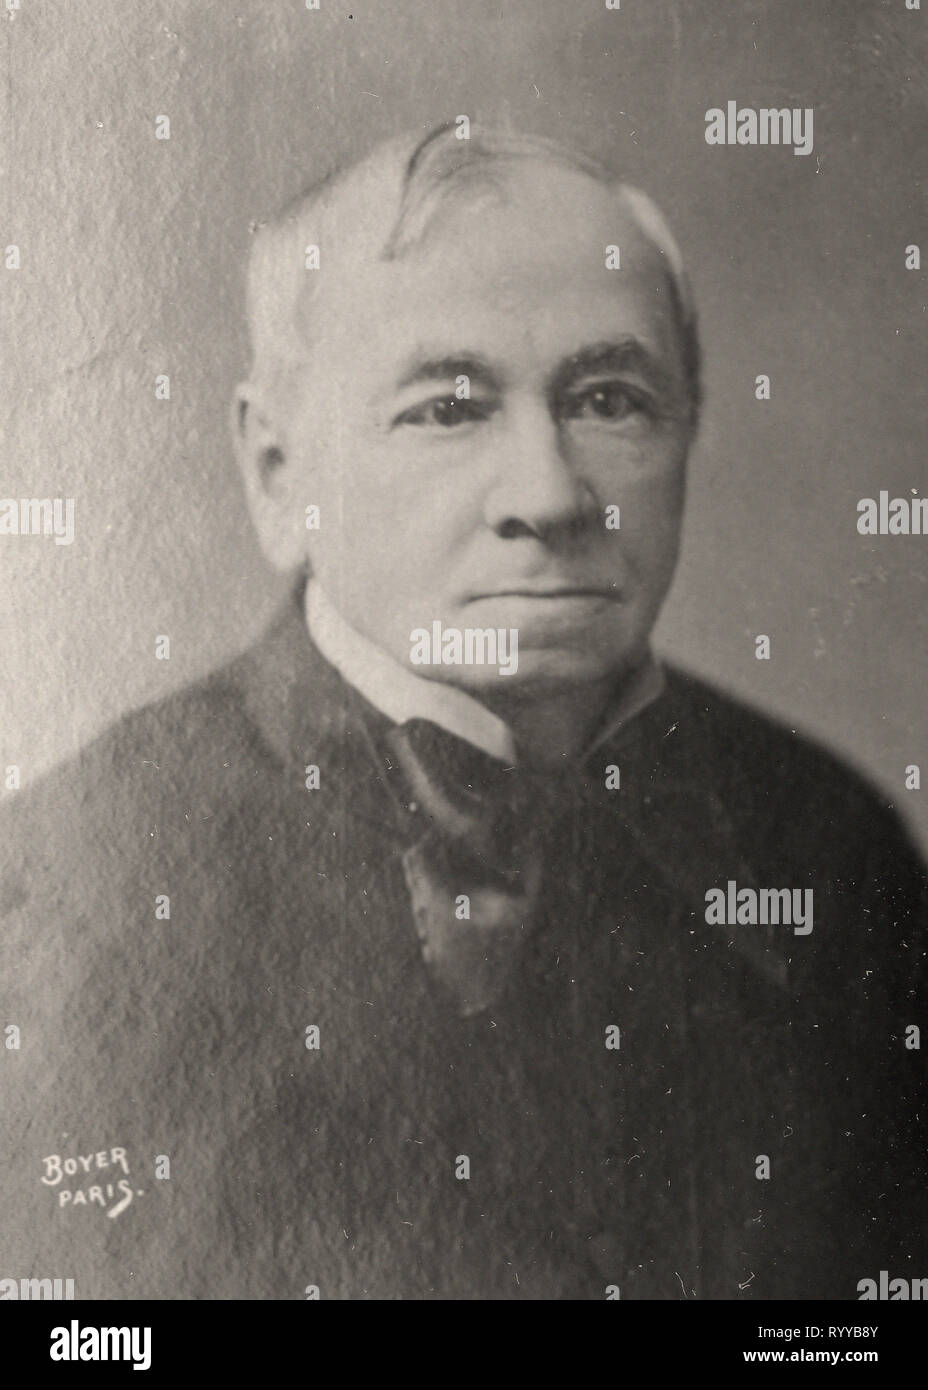 Photographic Portrait Of Girardin   From Collection Félix Potin, Early 20th Century Stock Photo